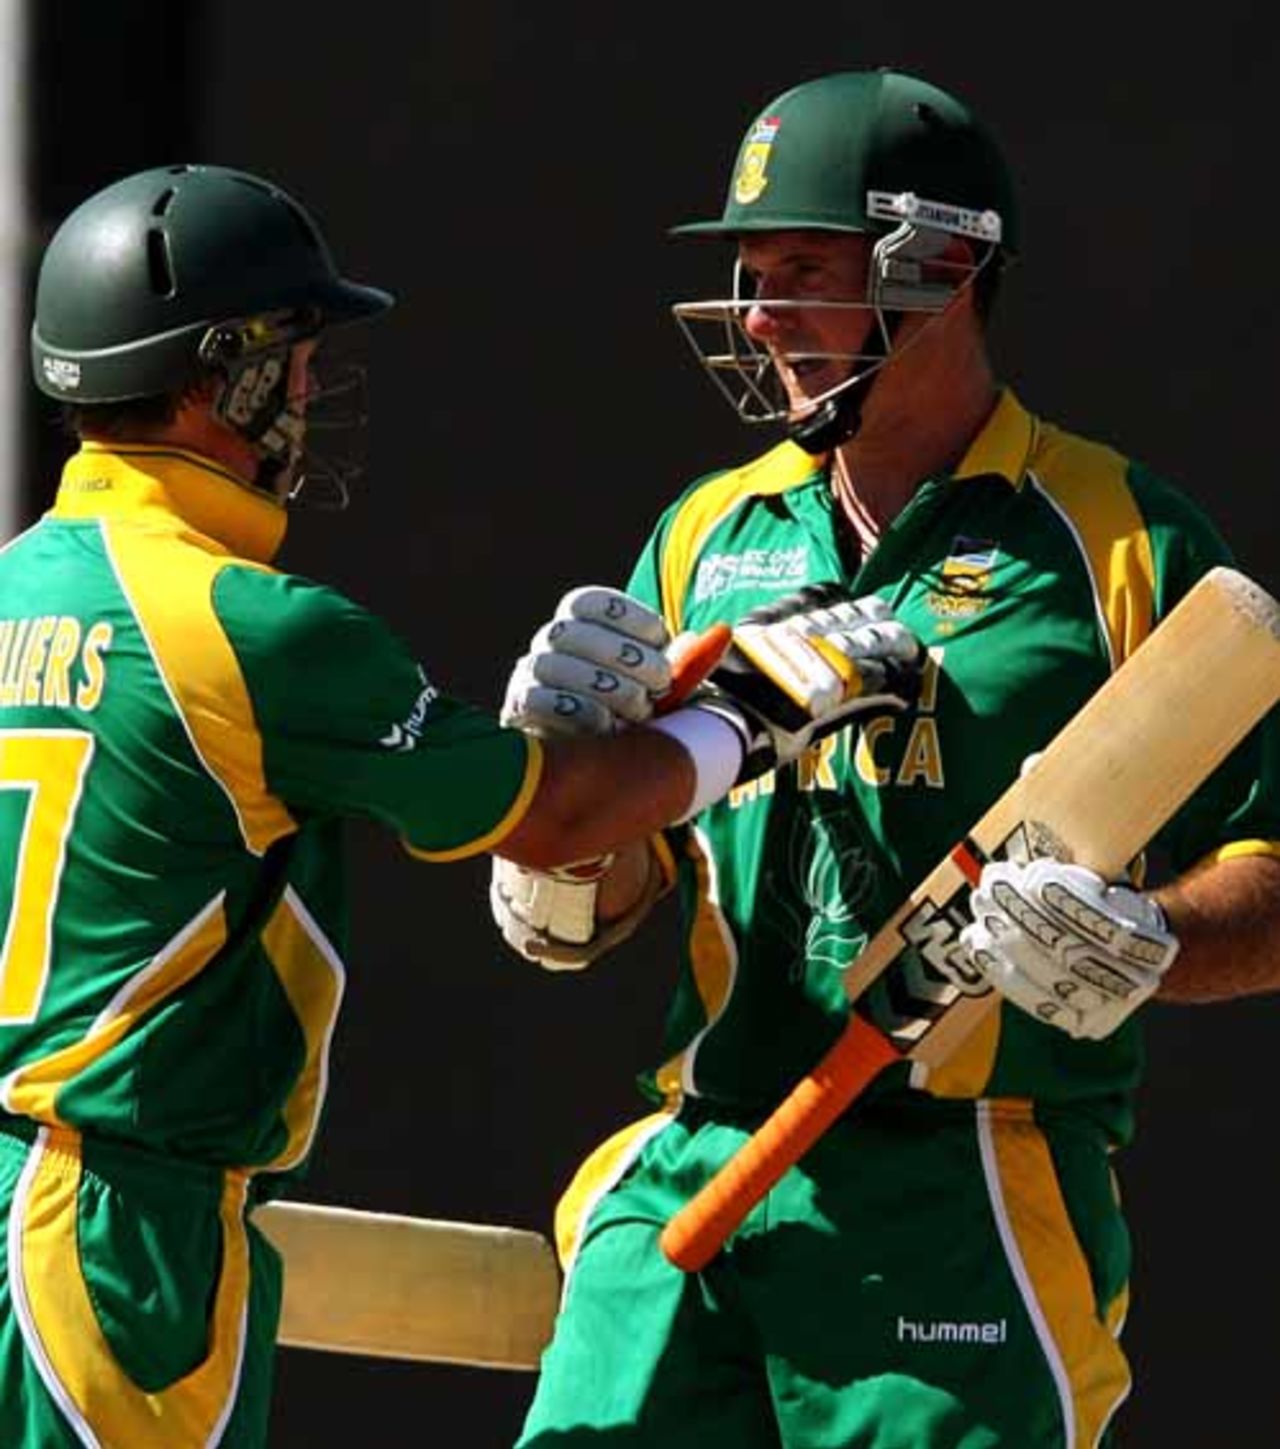 Graeme Smith and AB de Villiers during their whirlwind stand, Group A, St Kitts, March 24, 2007